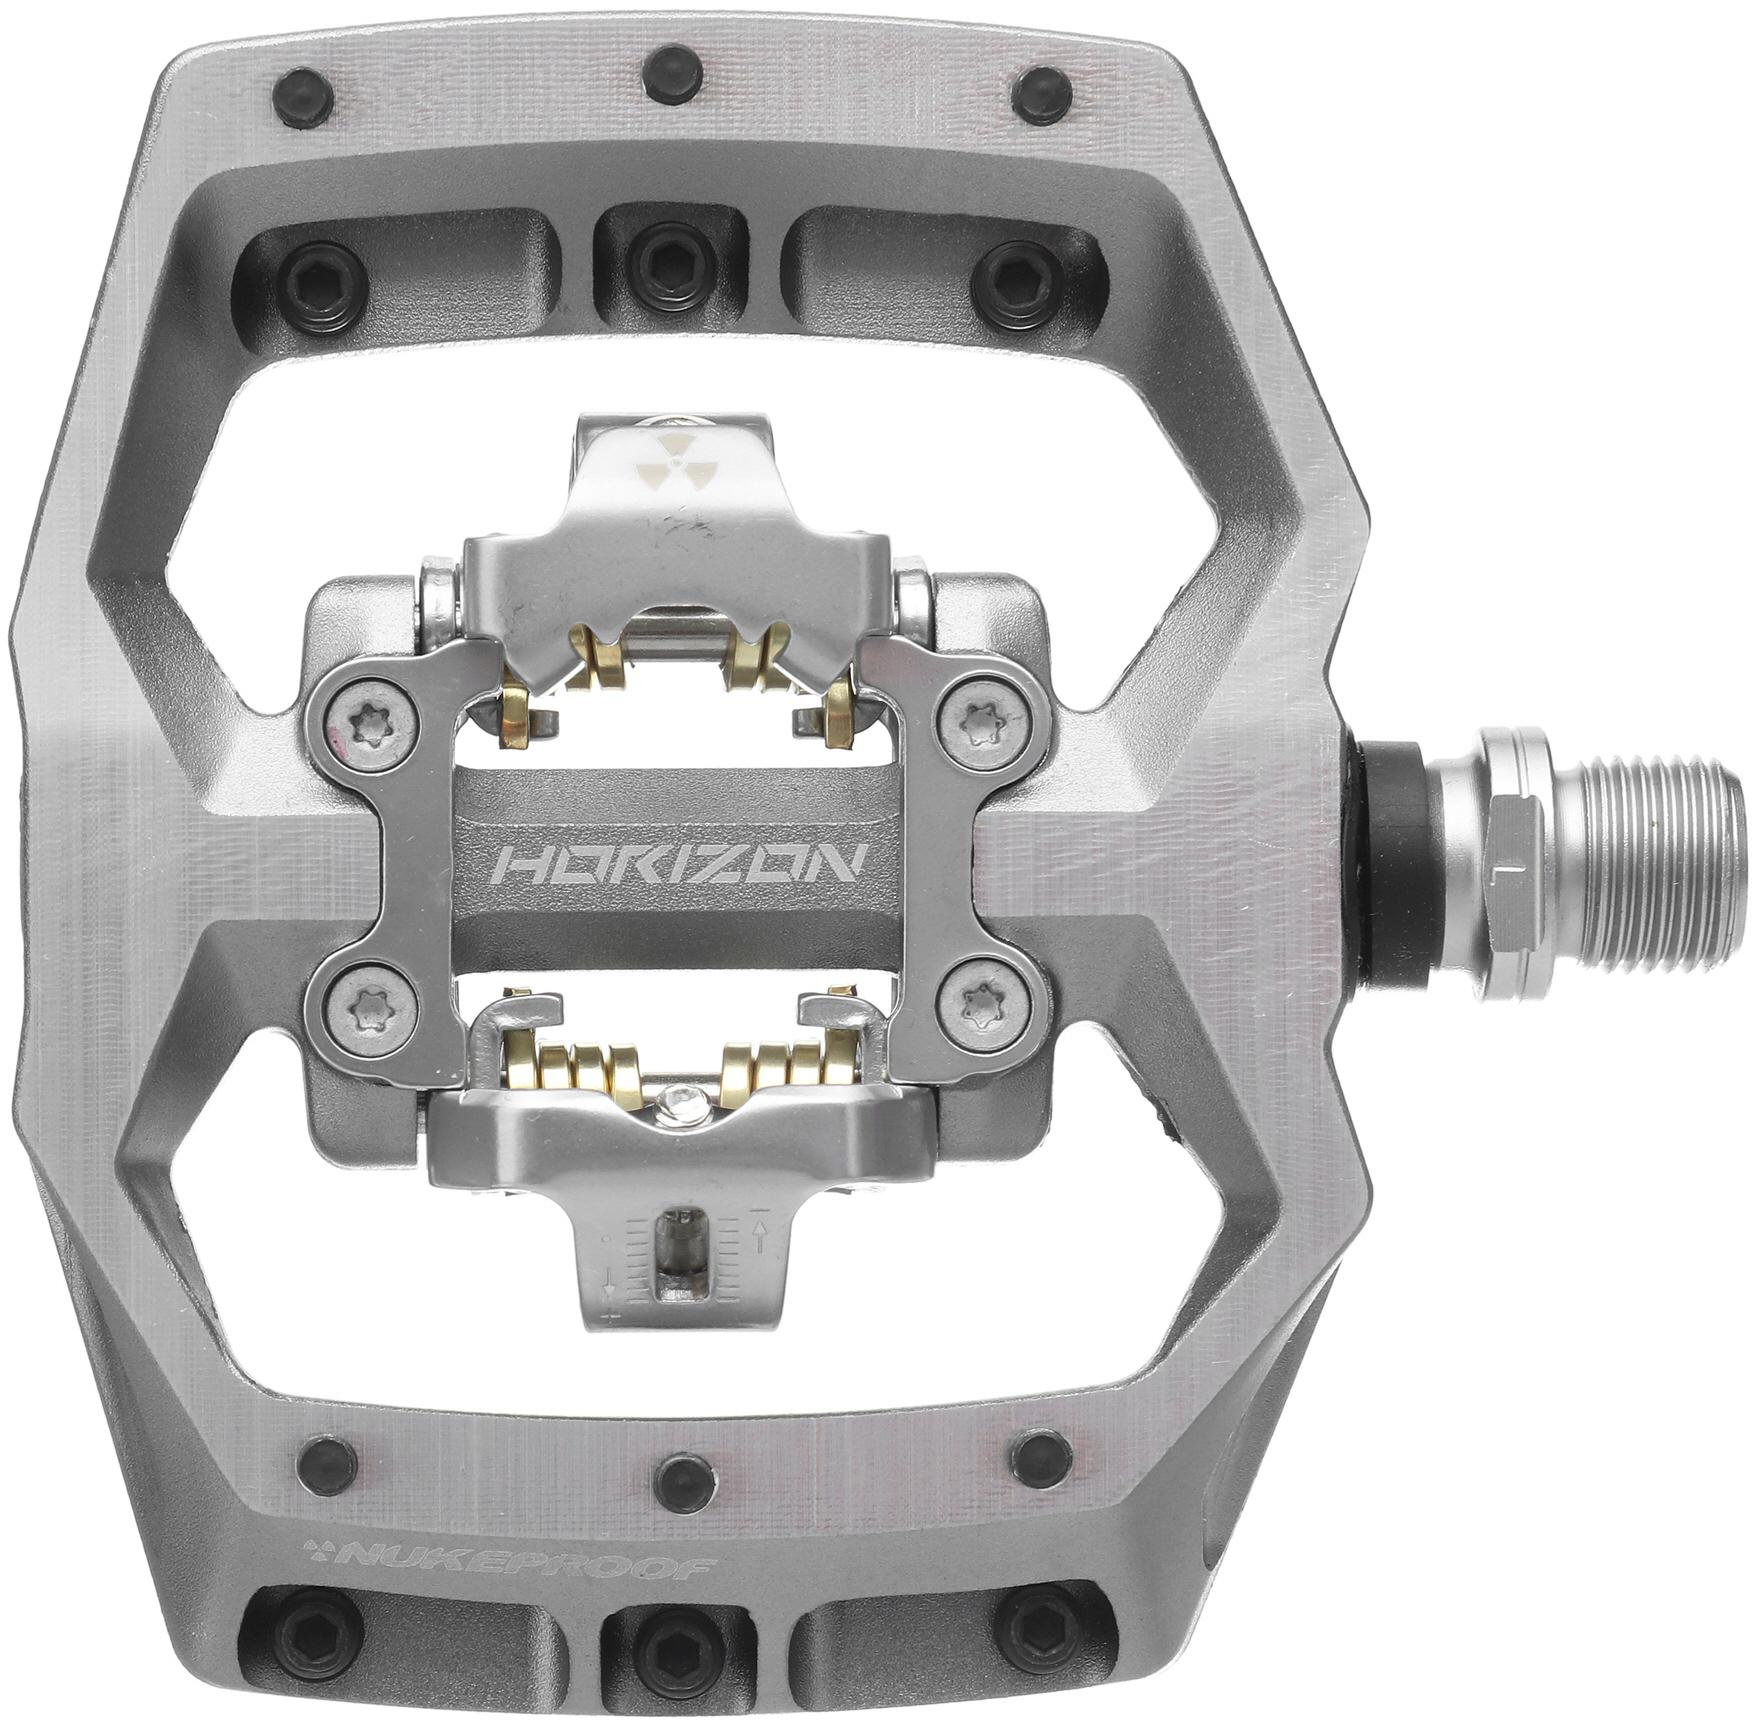 Nukeproof Horizon Cl Crmo Downhill Pedals  Grey